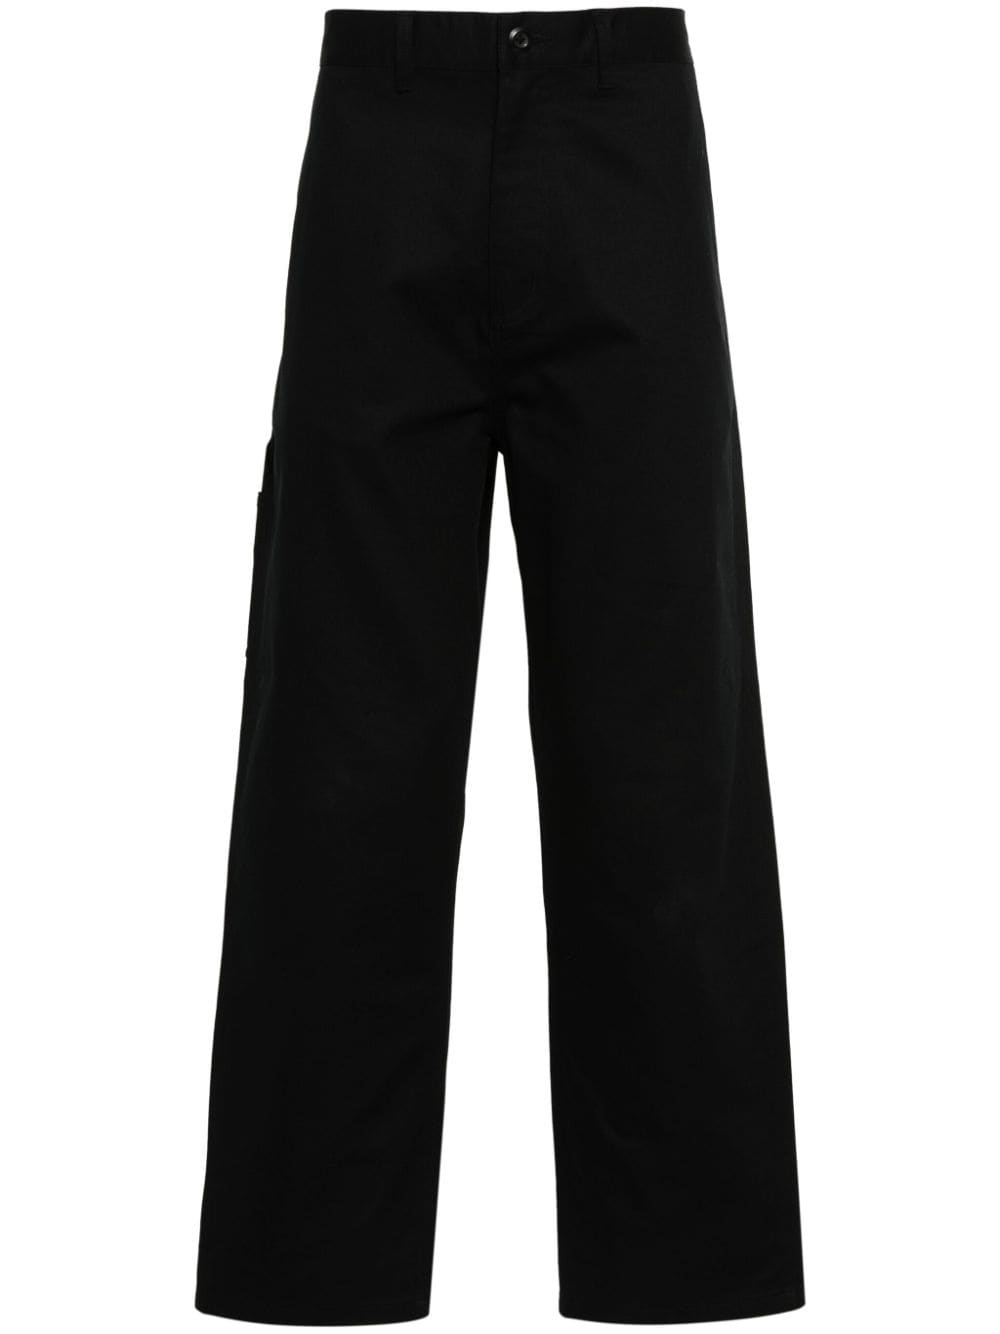 Image 1 of Carhartt WIP Midland logo-patch trousers